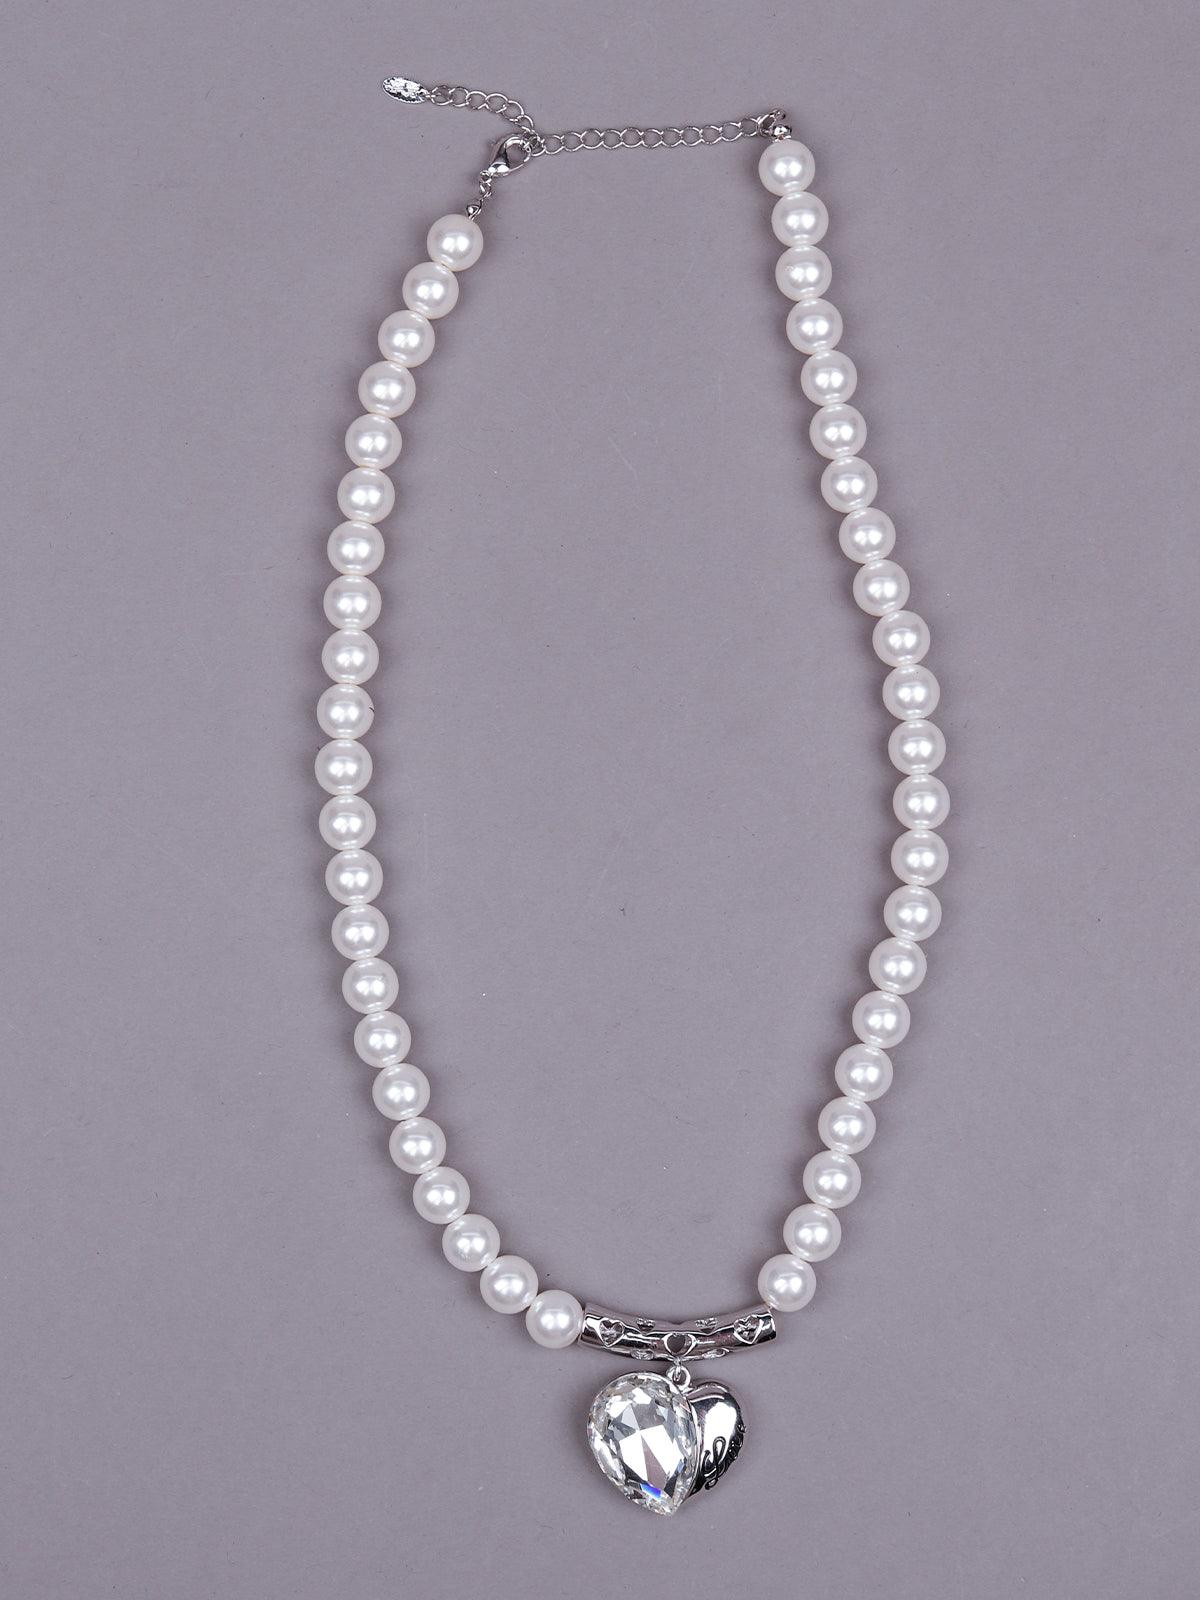 Exquisite pearl necklace with a heart shape pendant - Odette